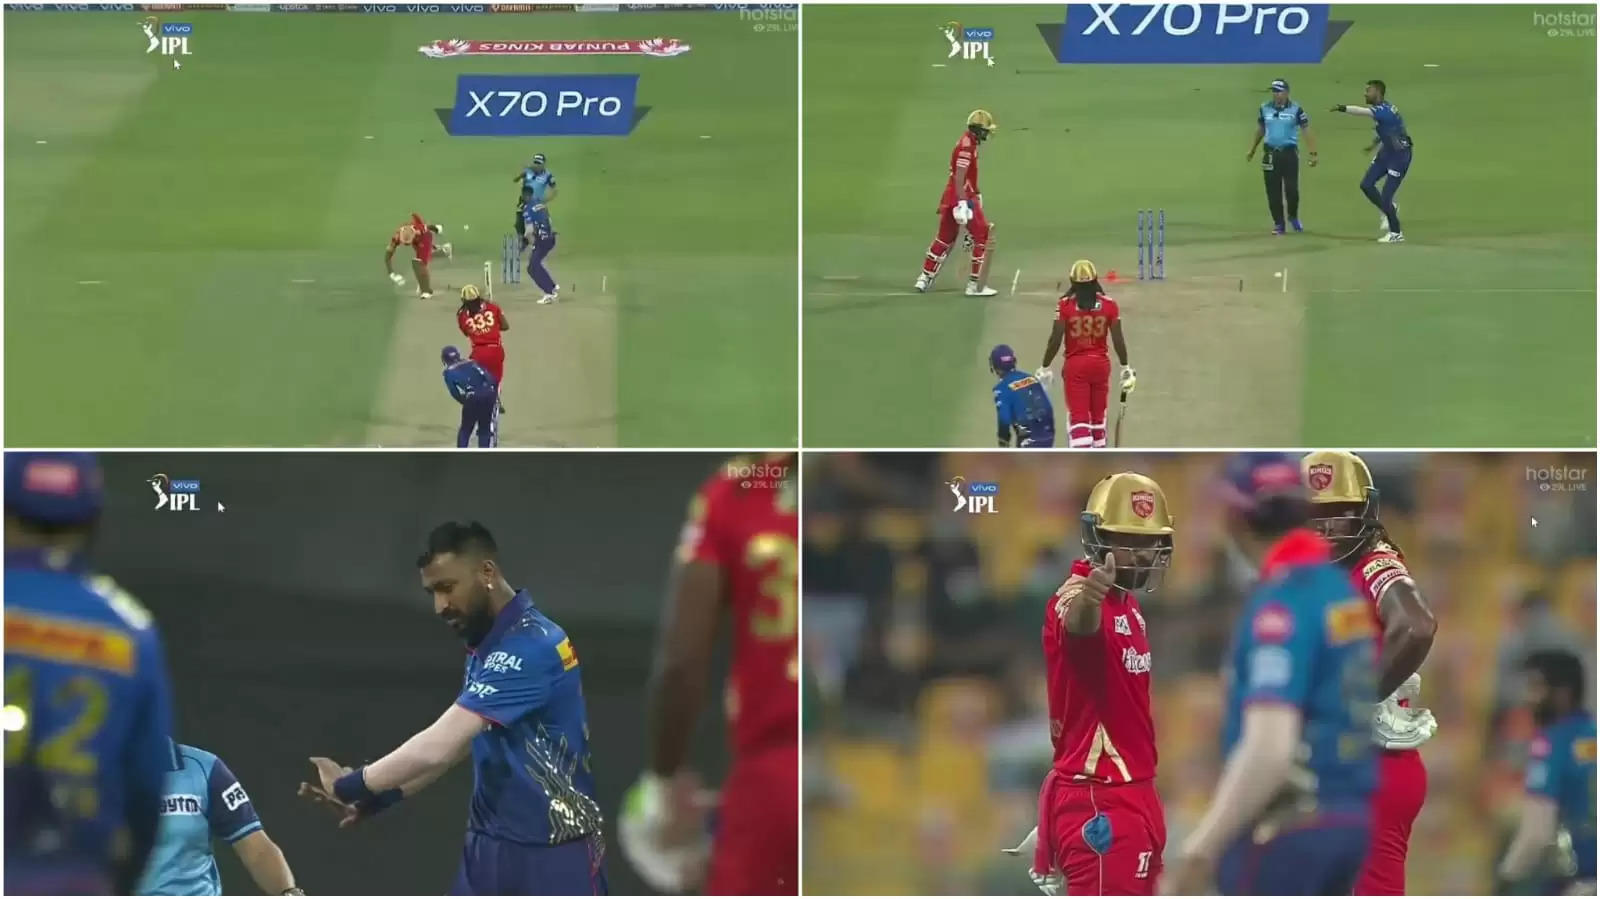 WATCH: Krunal Pandya declines run out to tend to KL Rahul; wins hearts for fair play